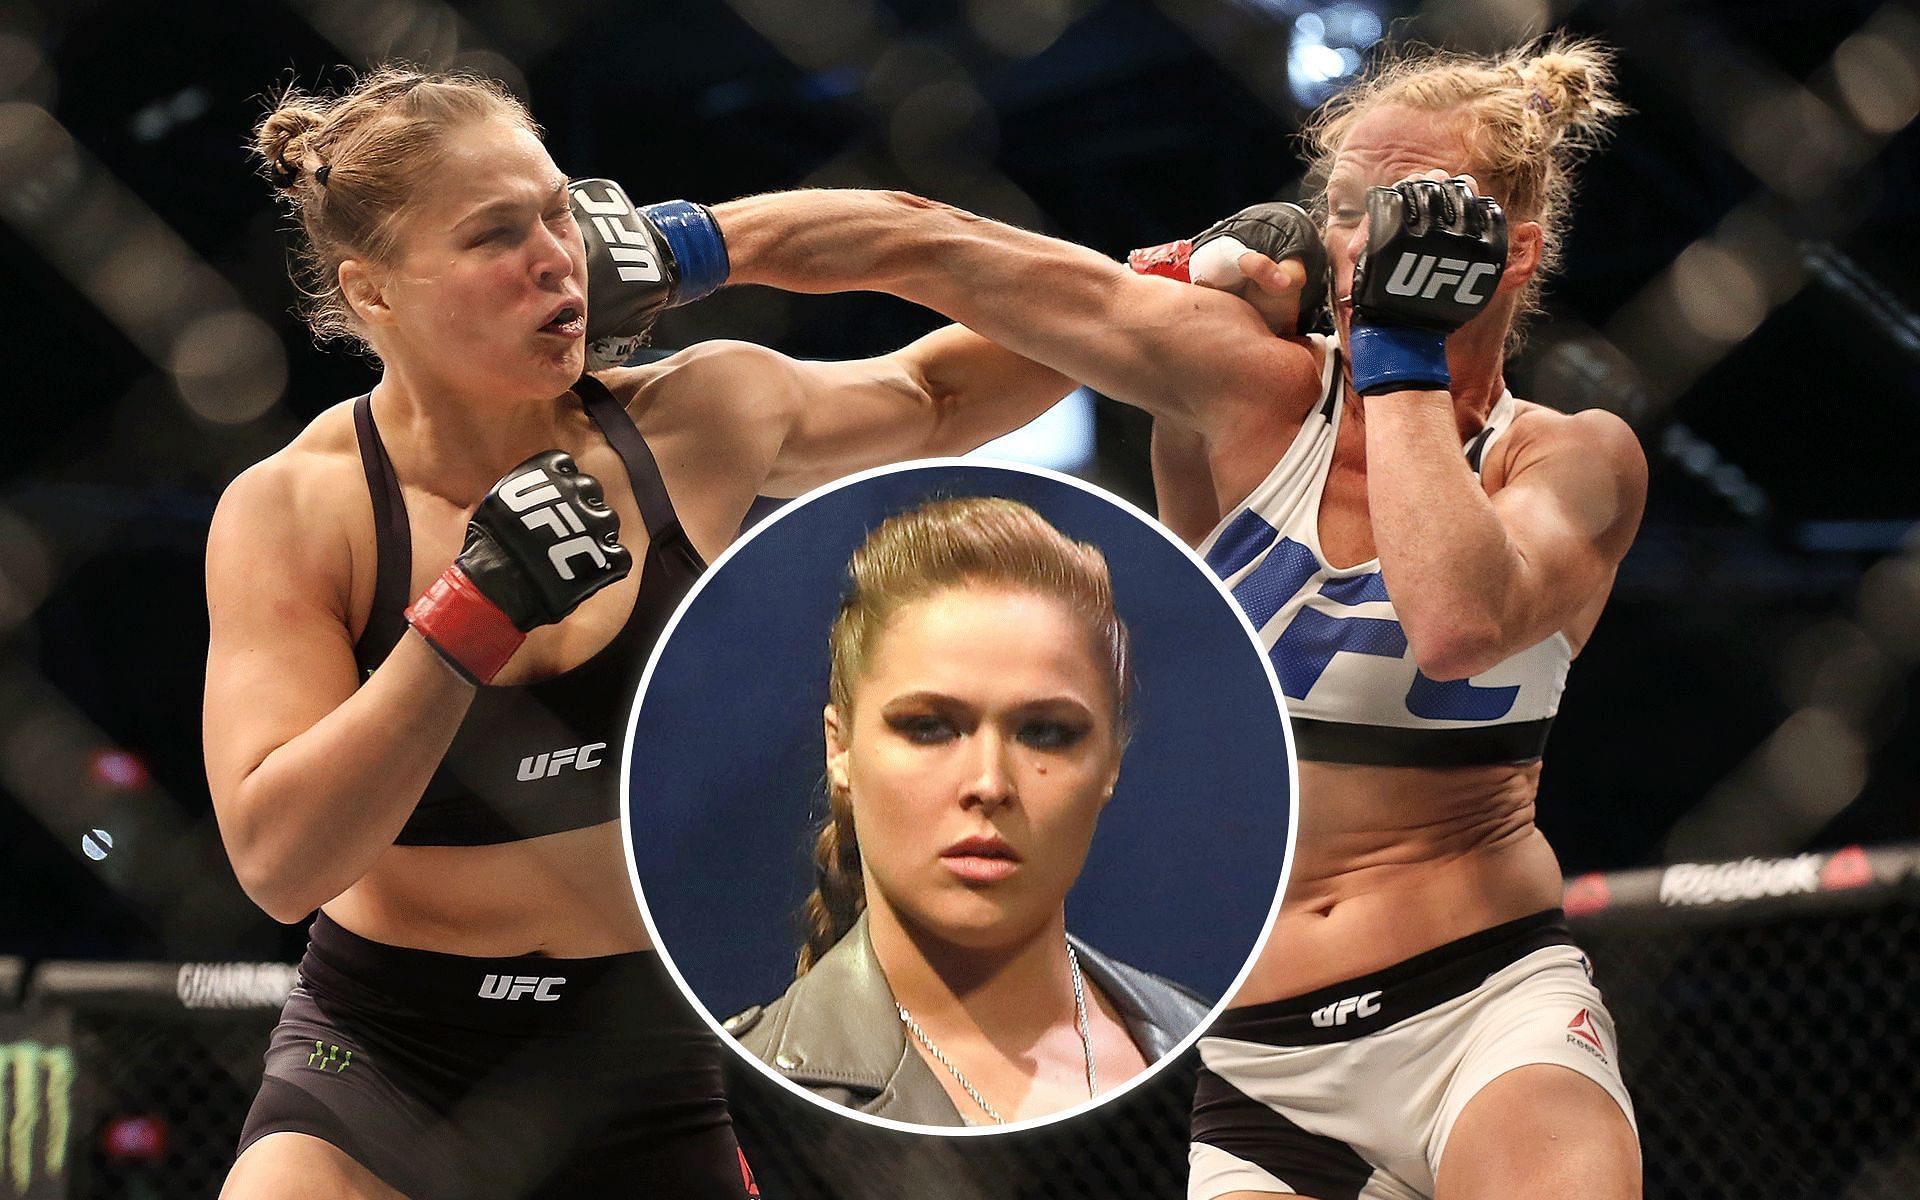 Ronda Rousey (left and inset) was a dominant undefeated UFC champion entering her fight against boxing veteran and MMA stalwart Holly Holm (right) at UFC 193 [Images courtesy: Getty Images]